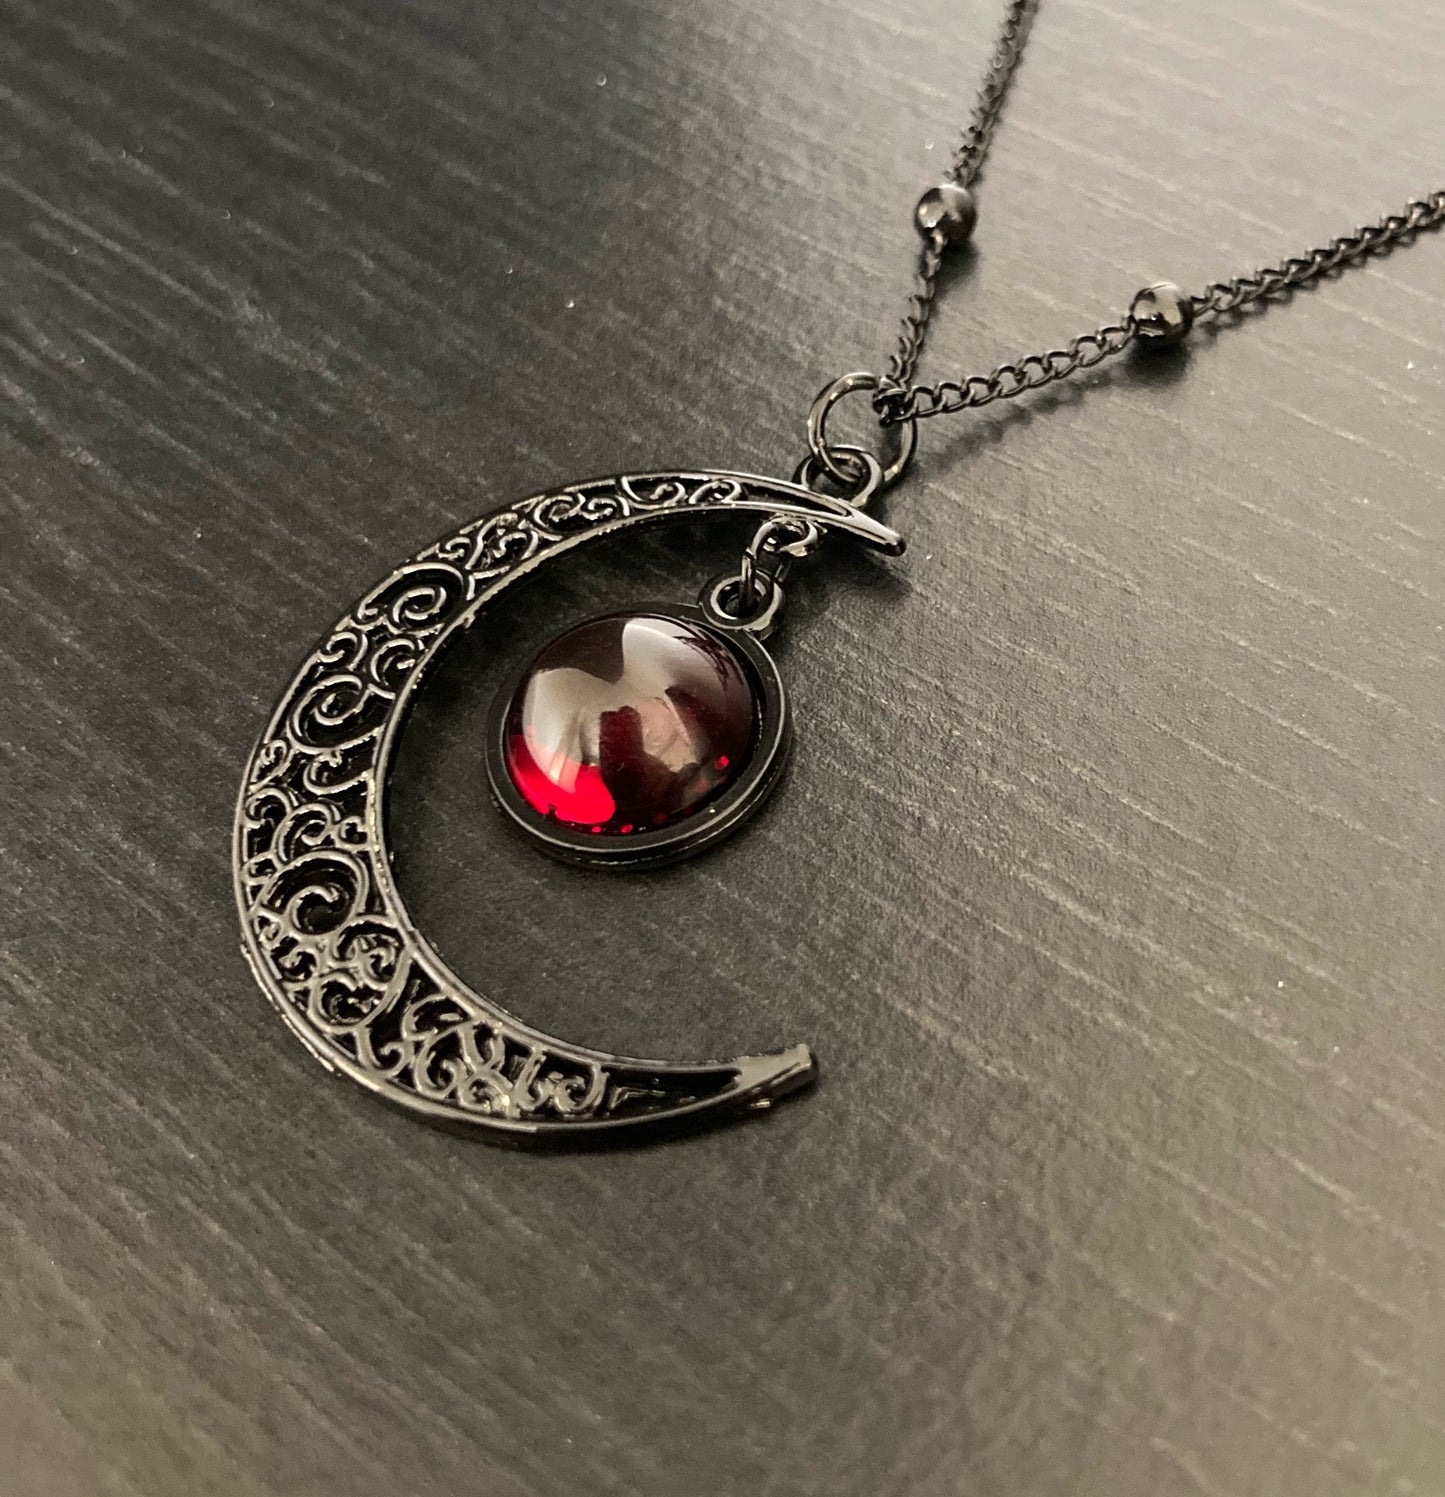 A necklace is lying on a dark surface. There is a crescent moon pendant with a dark red glass dome shape hanging from the tip of it. There is a thin chain and the whole thing is black in colour. The moon has patterns etched onto it.